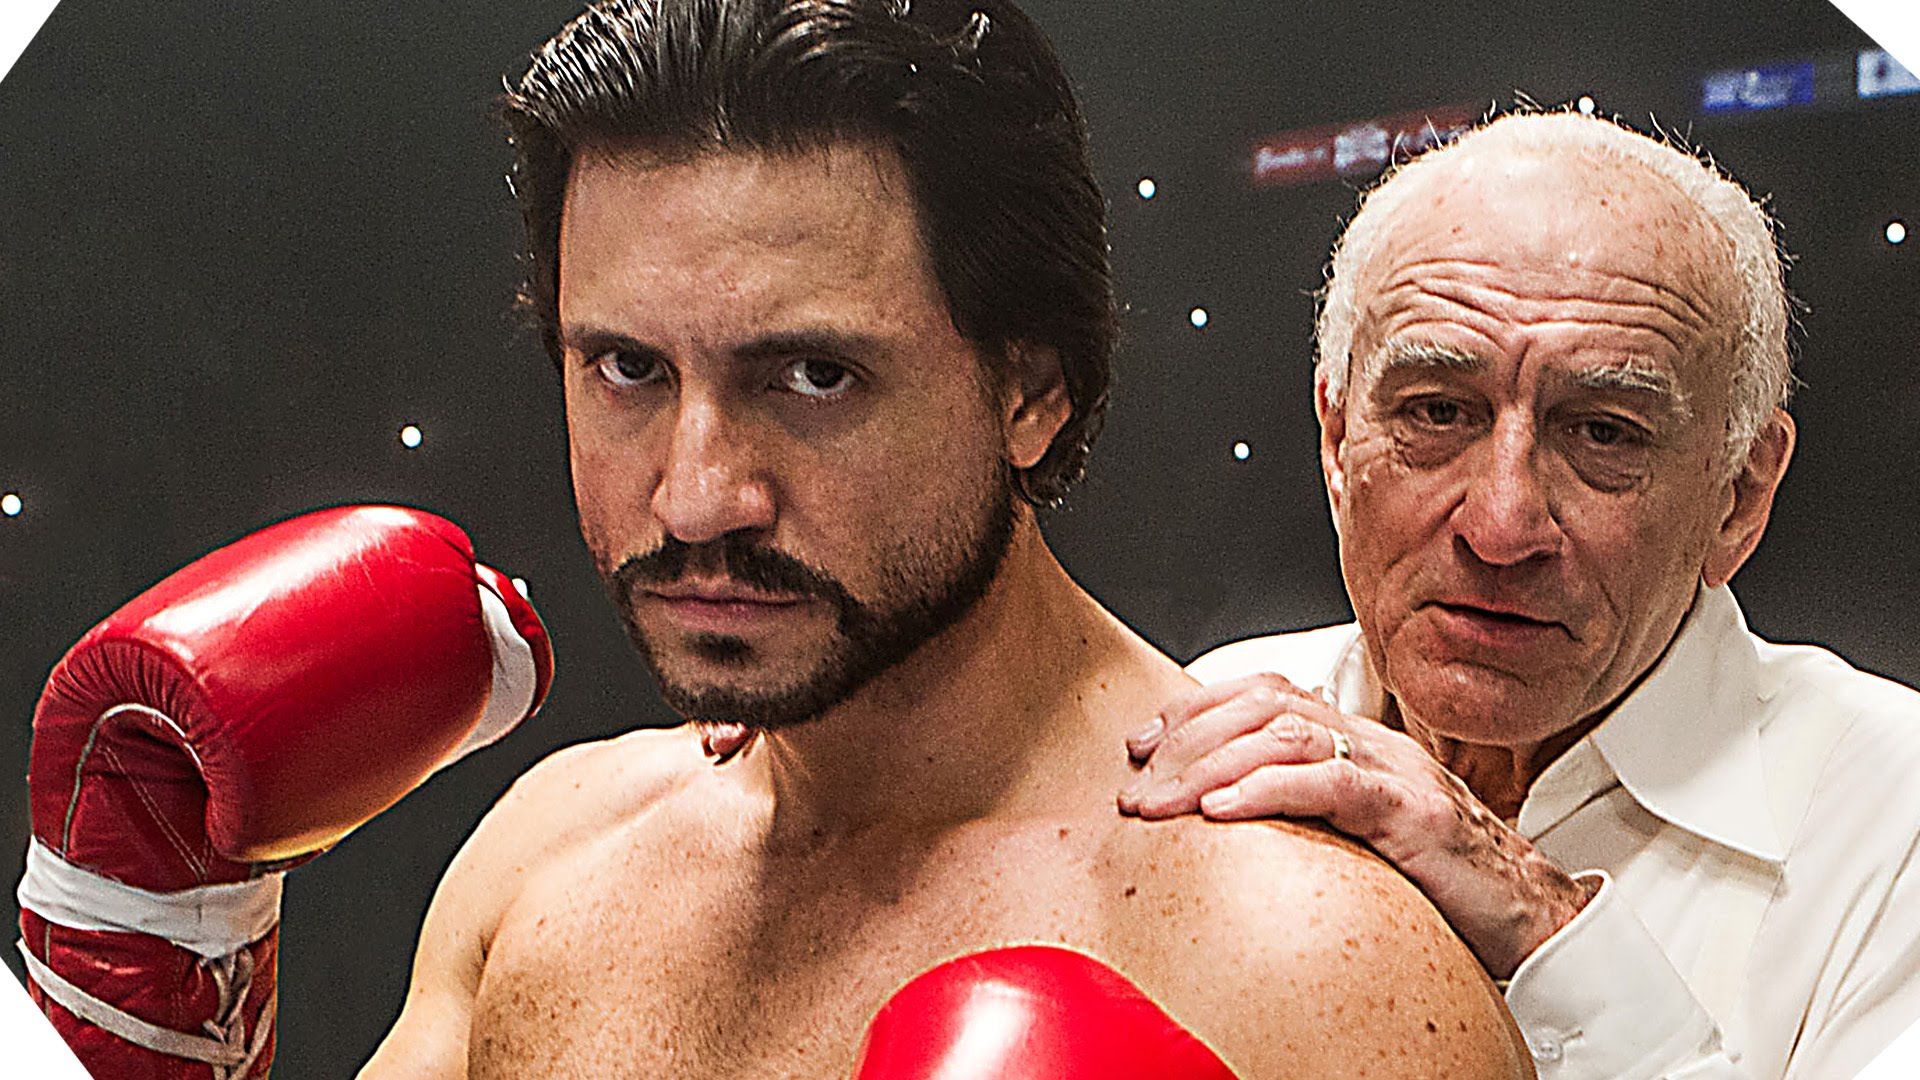 From Real Life To Reel Life: Hands Of Stone